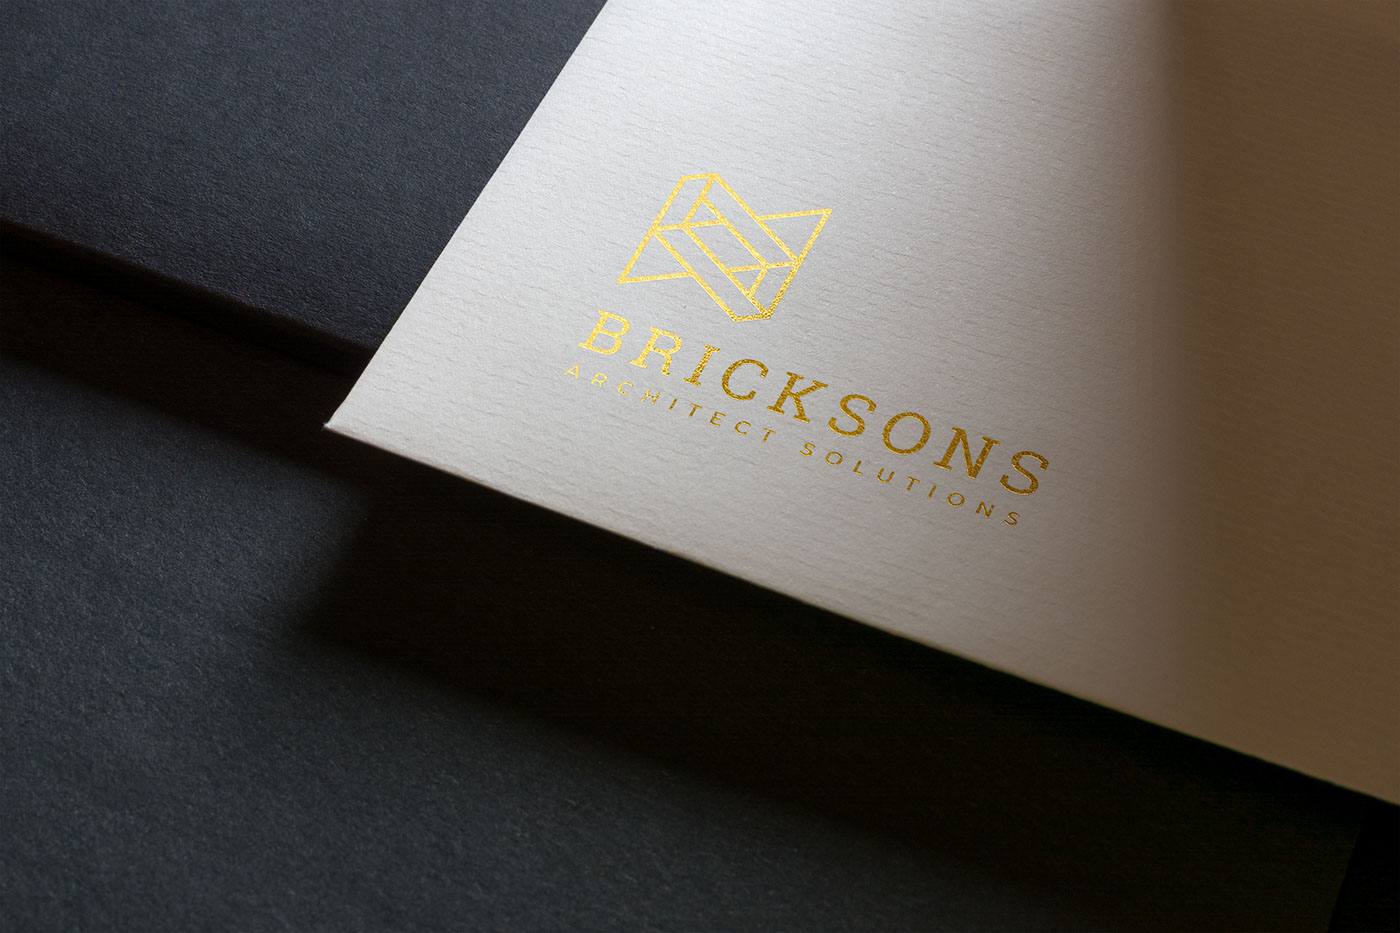 Mockup Collection photo stock t-shirt paper letterpress leather card notepad